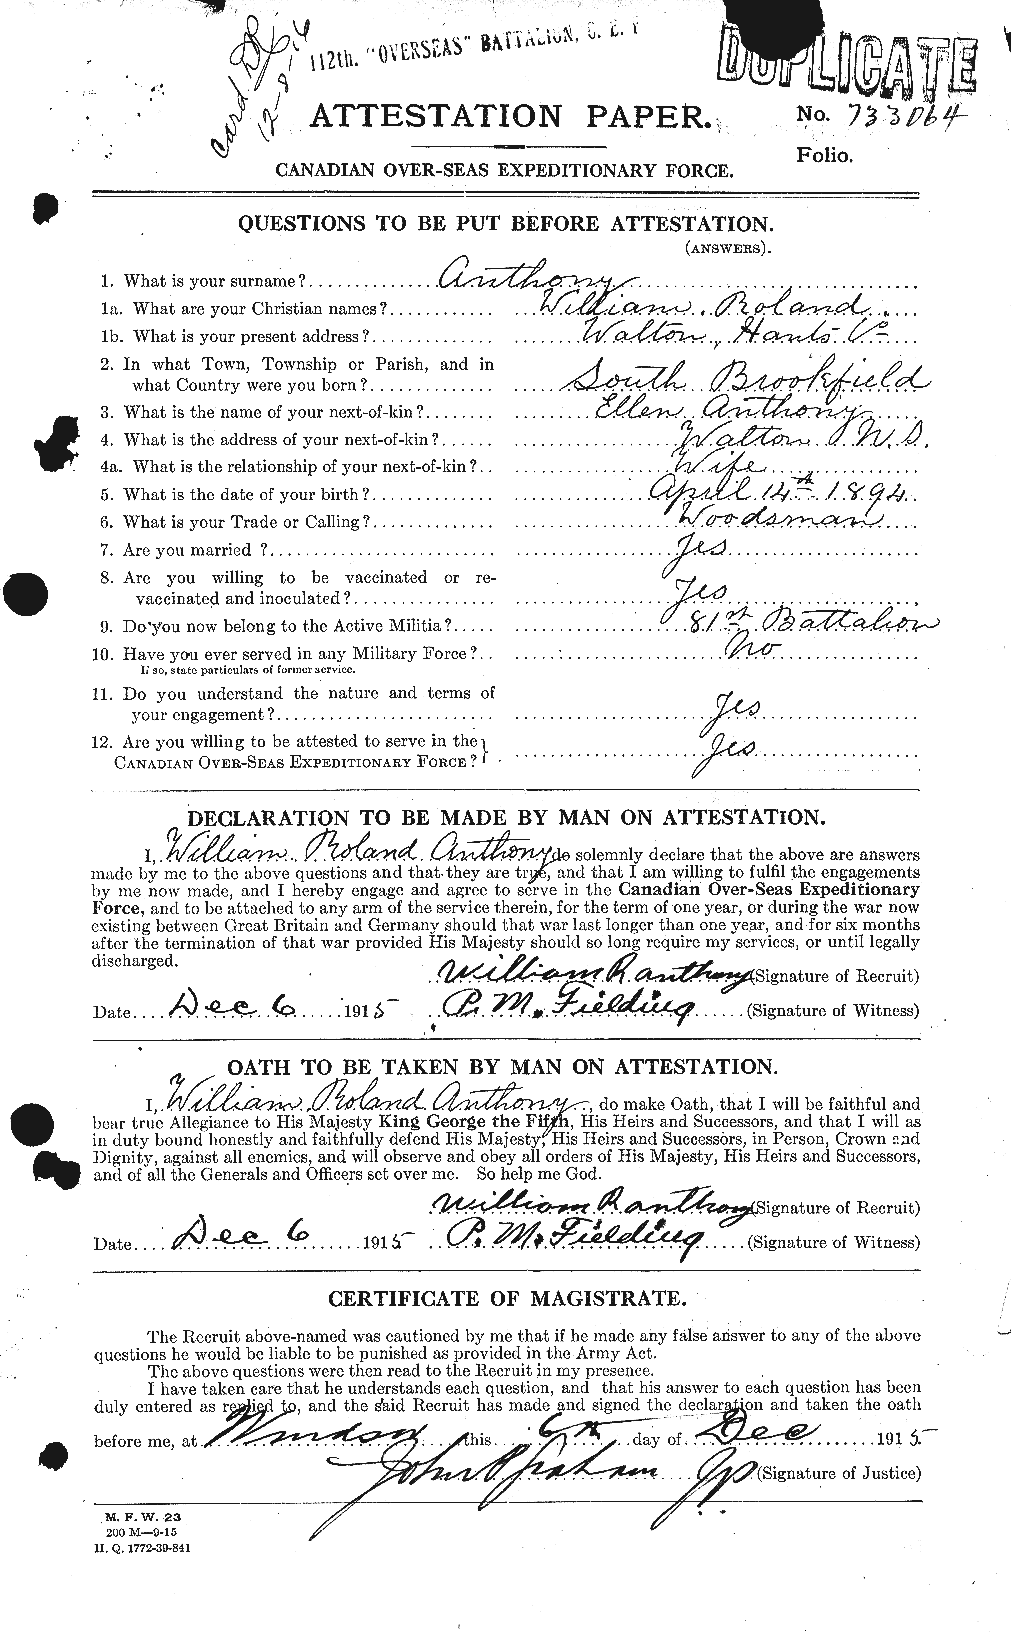 Personnel Records of the First World War - CEF 212160a